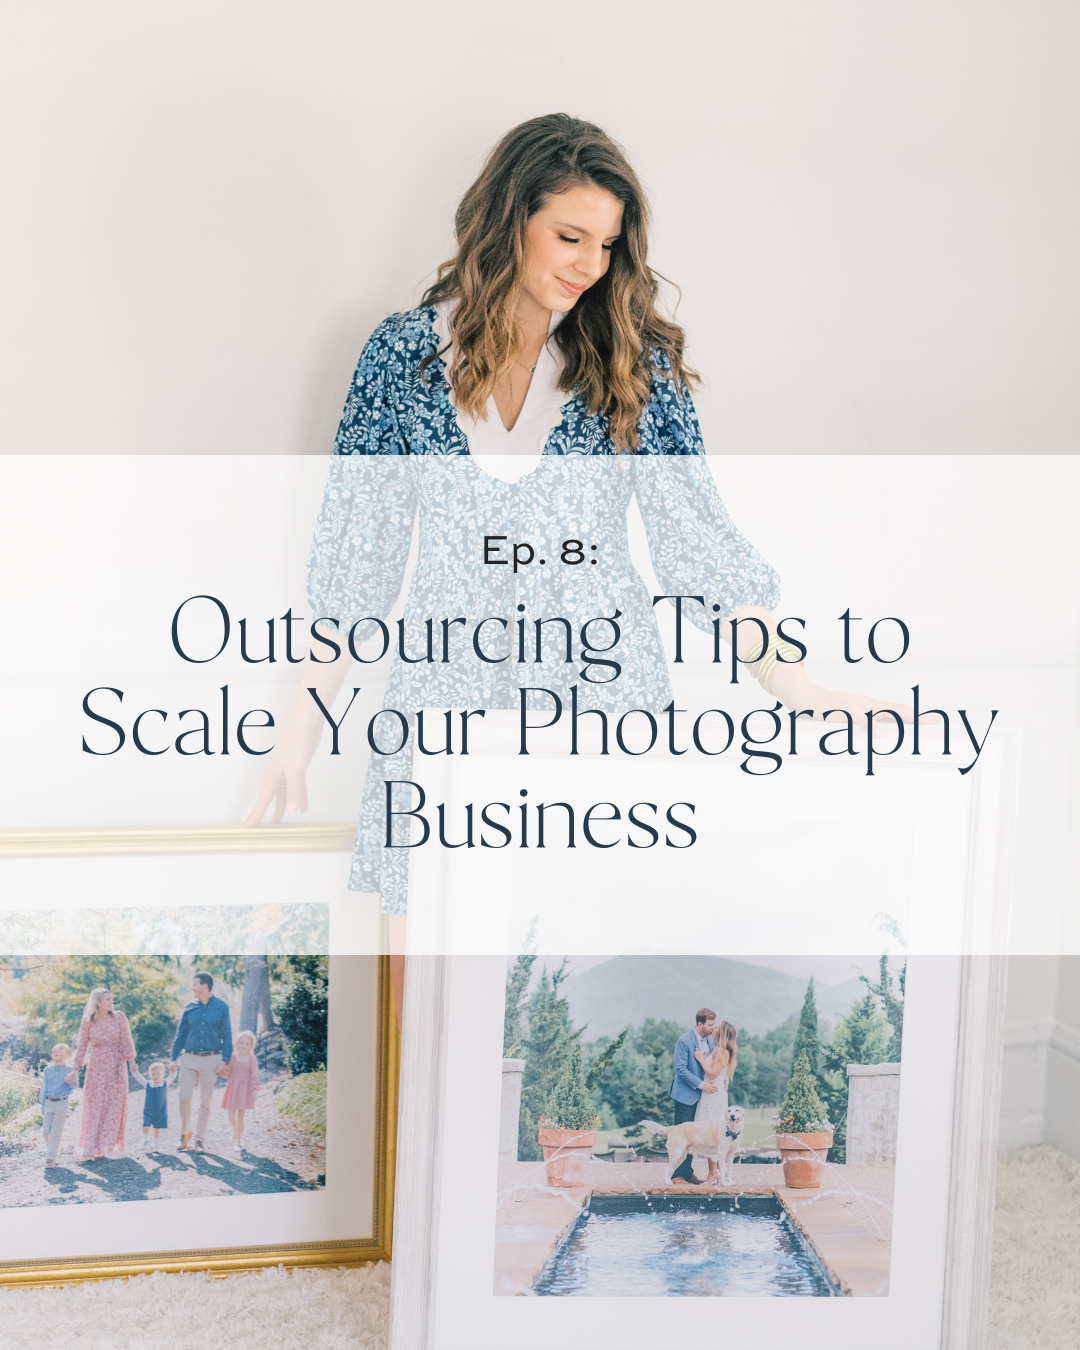 Outsourcing Tips to Scale Your Photography Business